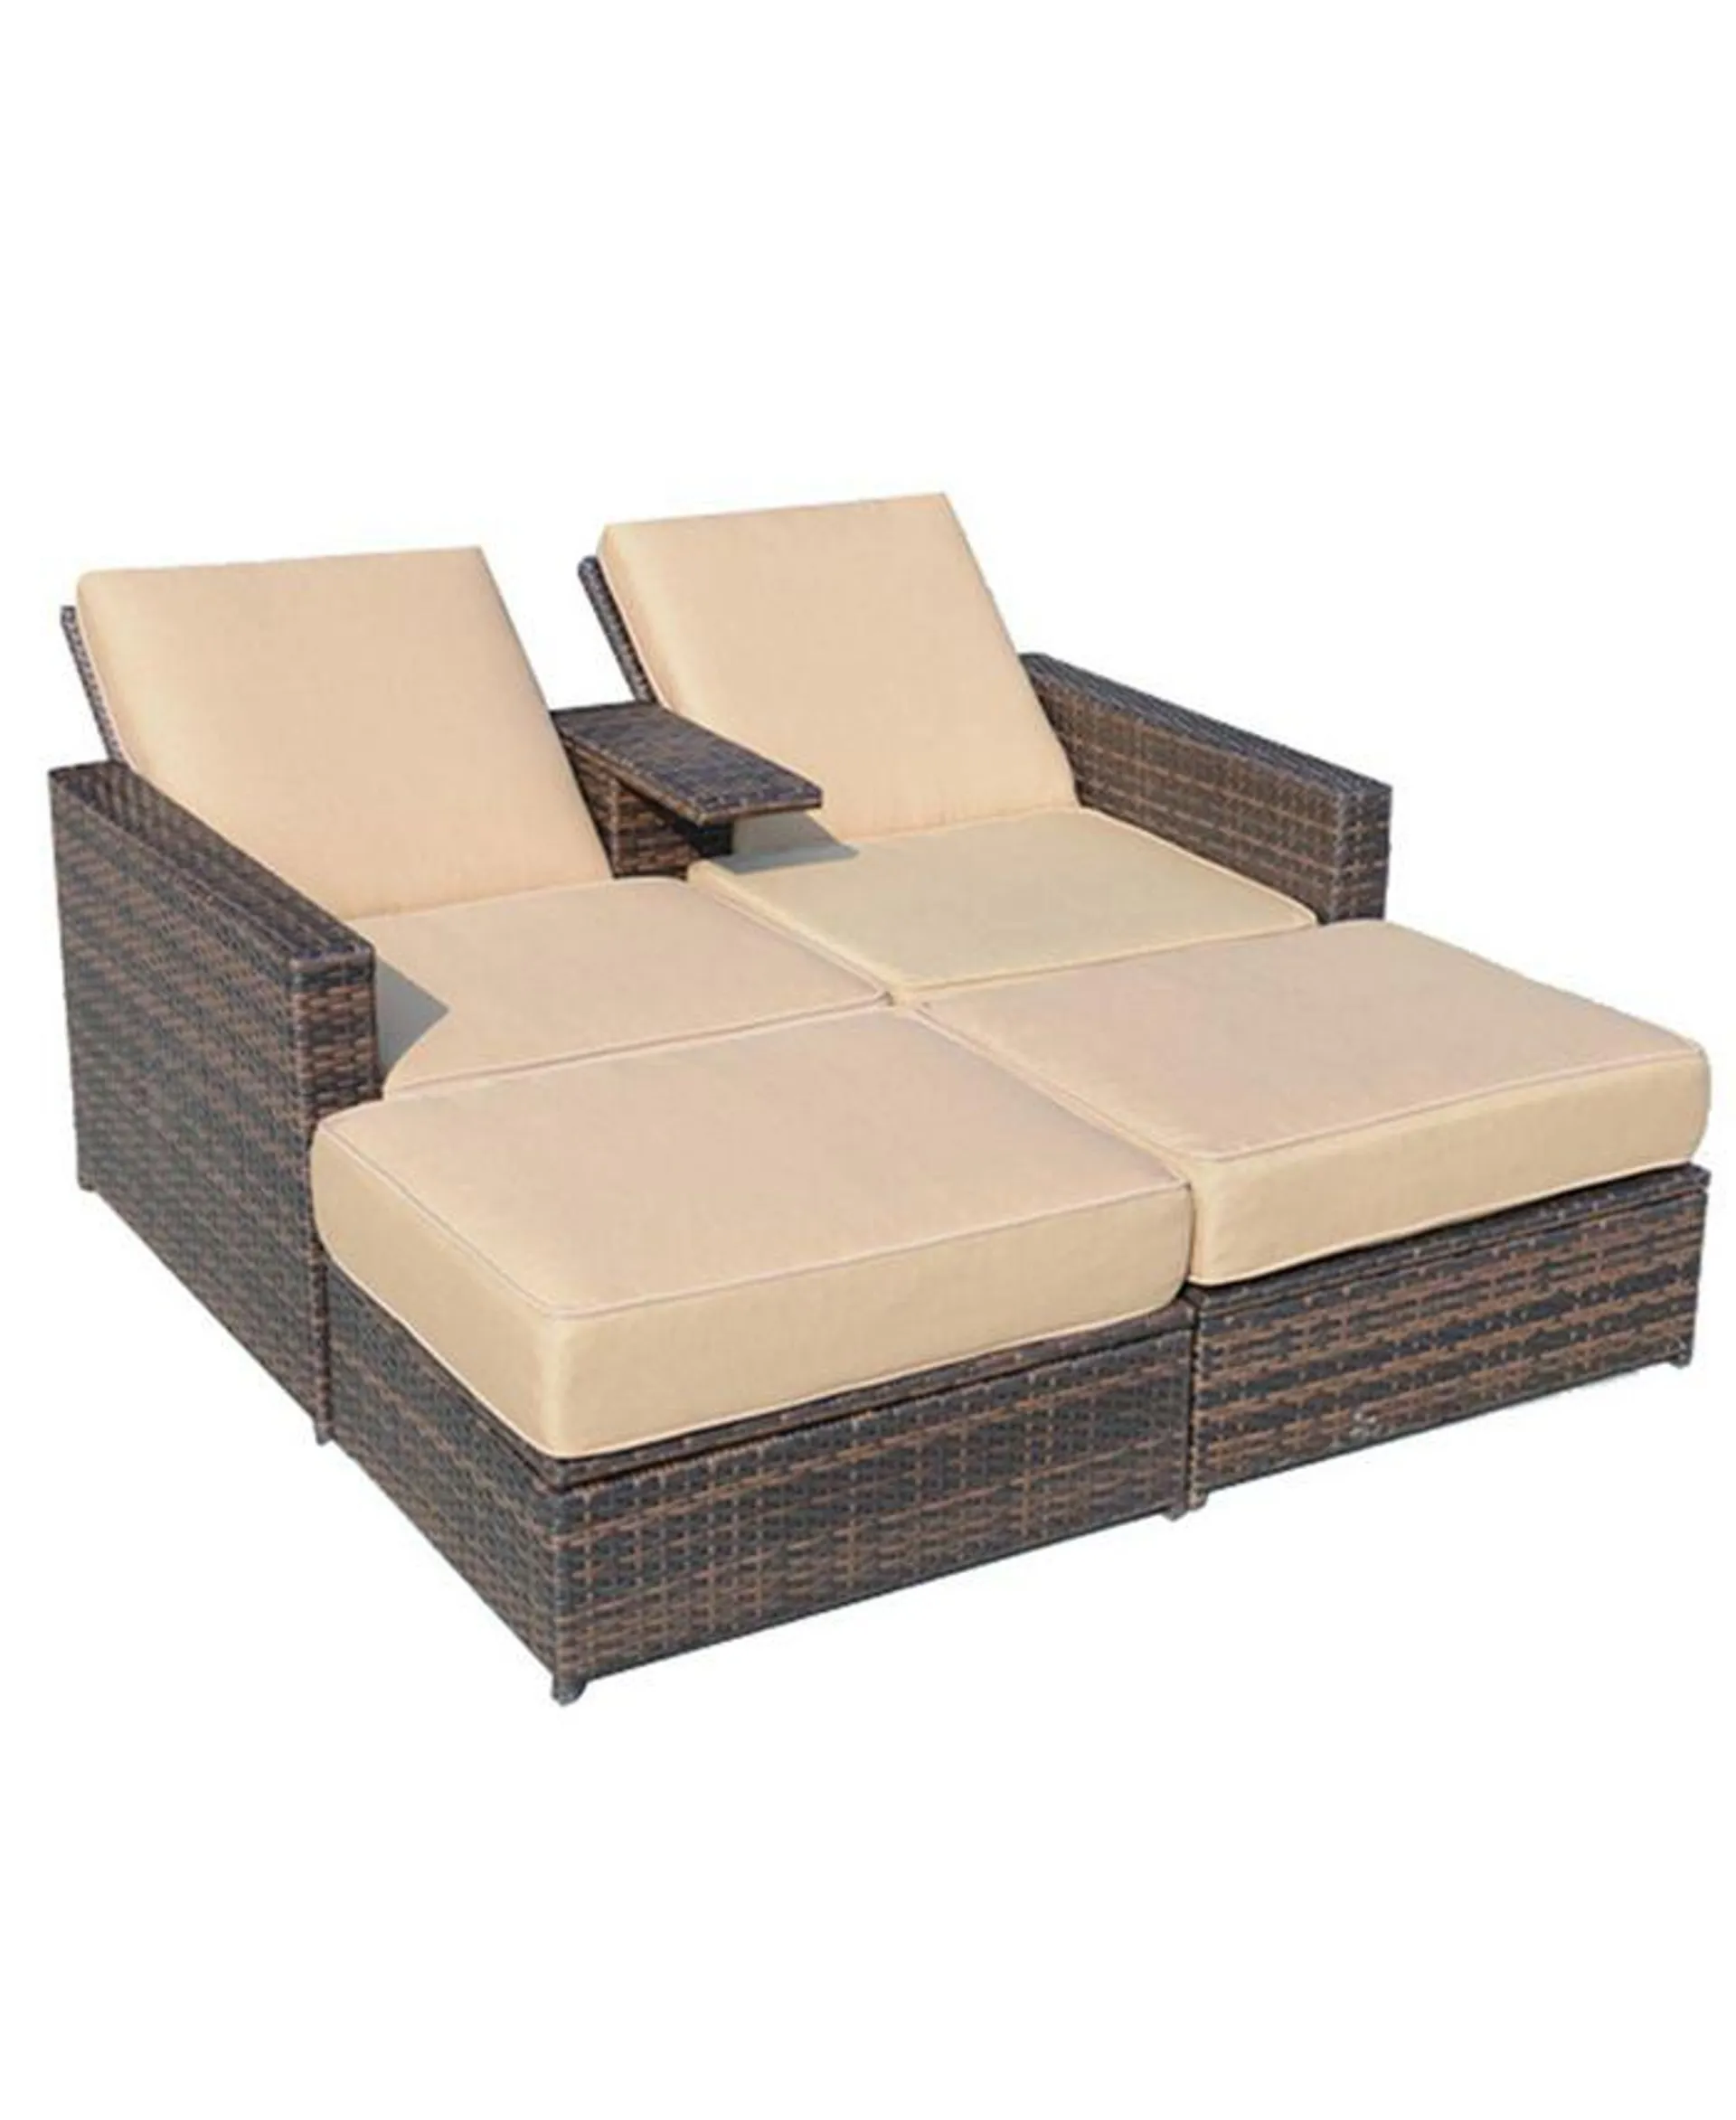 3 Piece Outdoor Wicker Chaise Lounge Chair Rattan Adjustable Reclining Patio Lounge Chair with Ottoman Footrests and Cushions, for Backyard Garden Deck, Brown